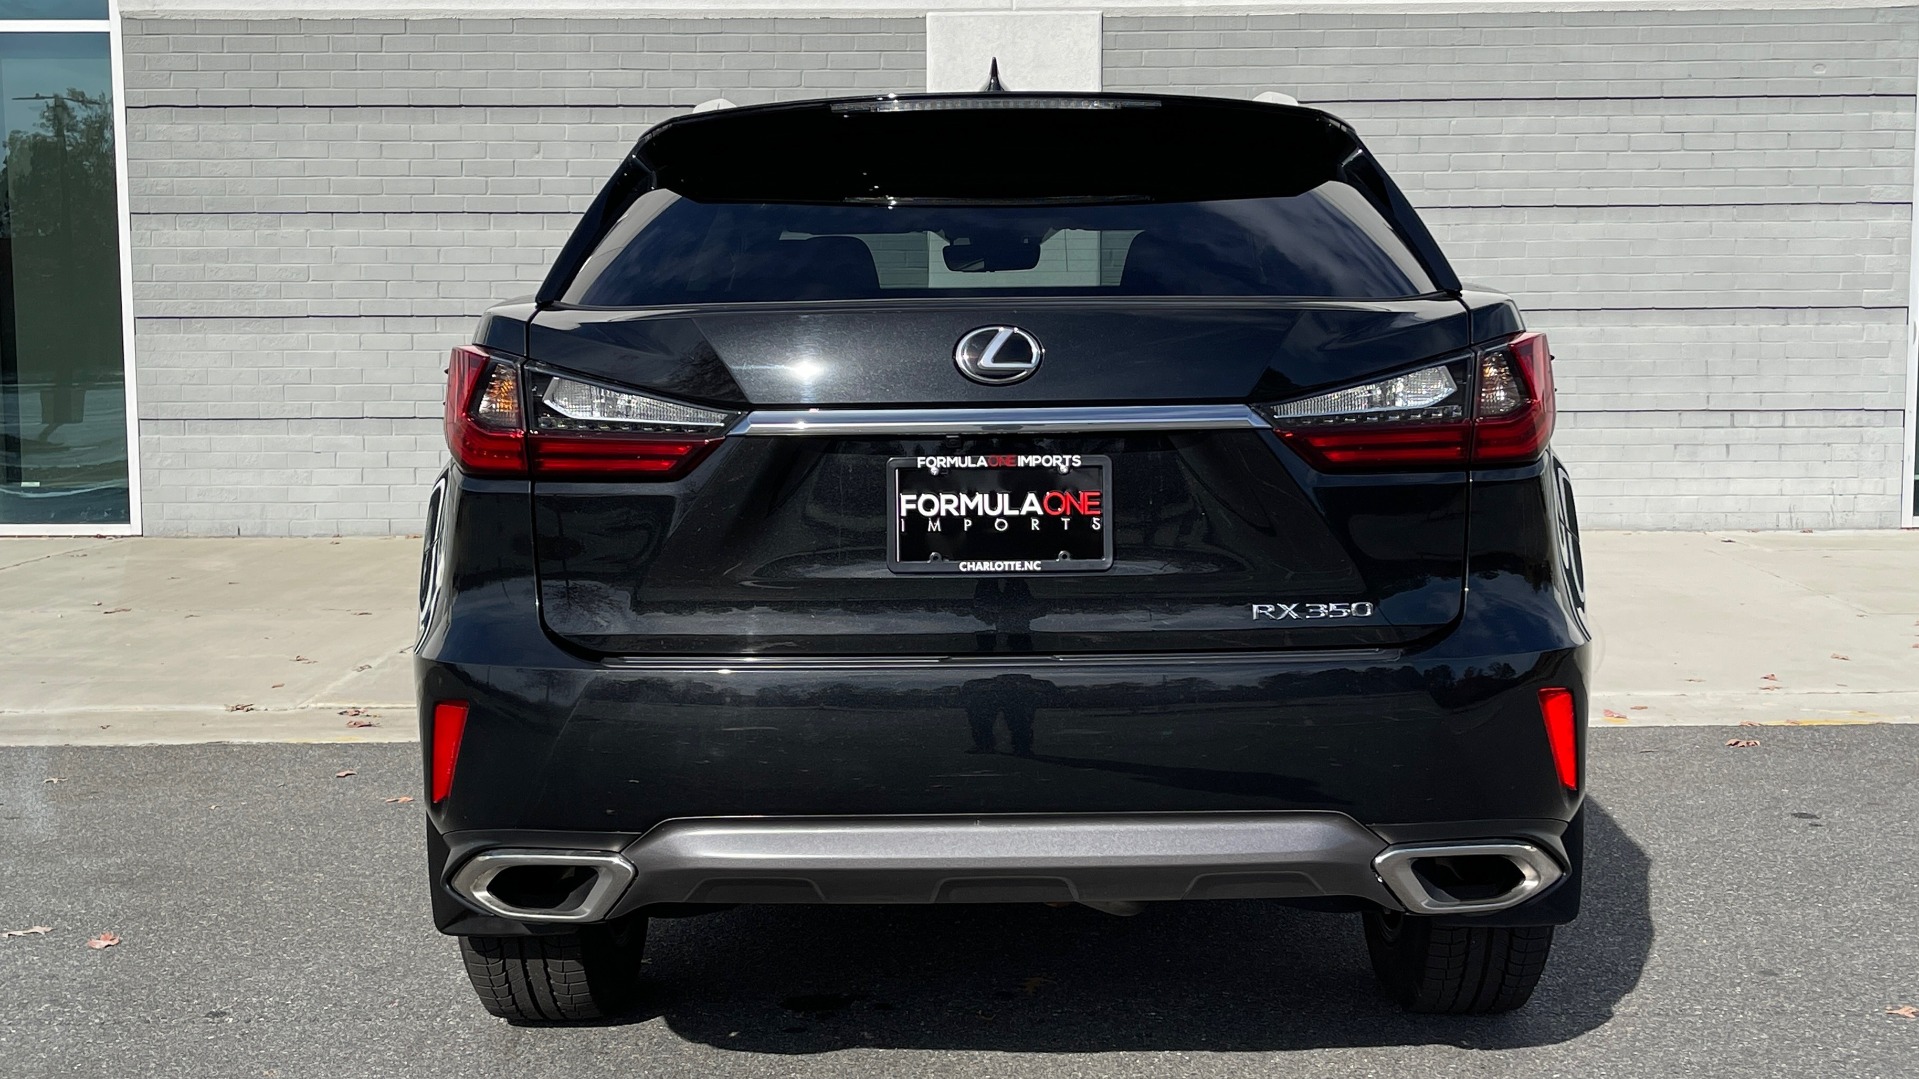 Used 2019 Lexus RX 350 3.5L SUV / AWD / SUNROOF / 18IN WHEELS / REARVIEW for sale $45,595 at Formula Imports in Charlotte NC 28227 15